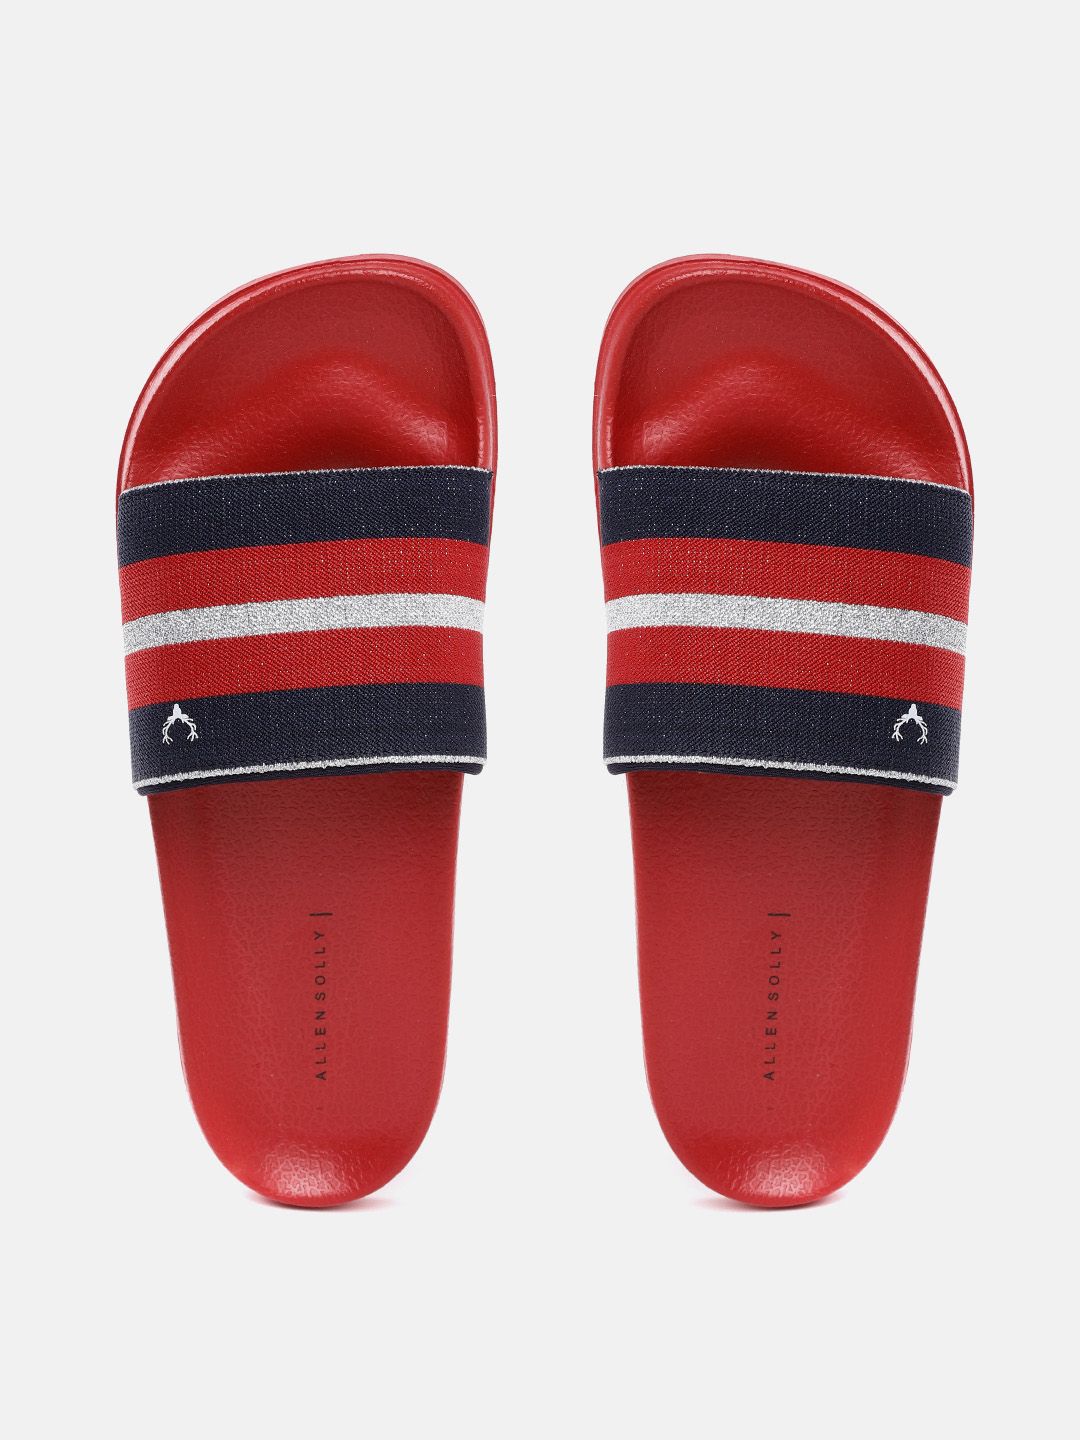 Allen Solly Women Red & Navy Blue Striped Sliders Price in India